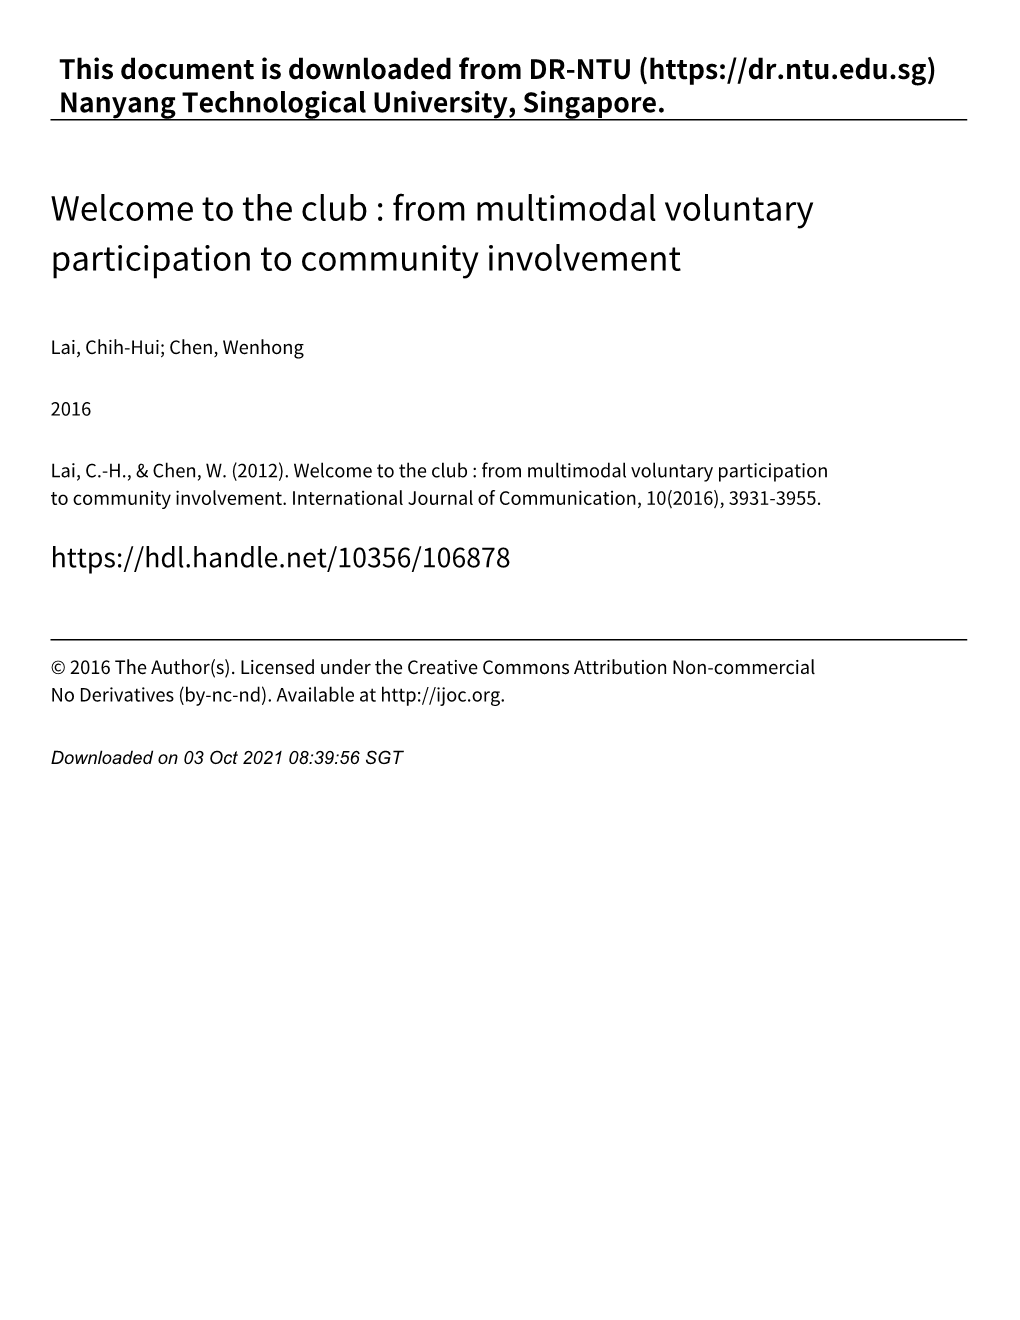 Welcome to the Club : from Multimodal Voluntary Participation to Community Involvement